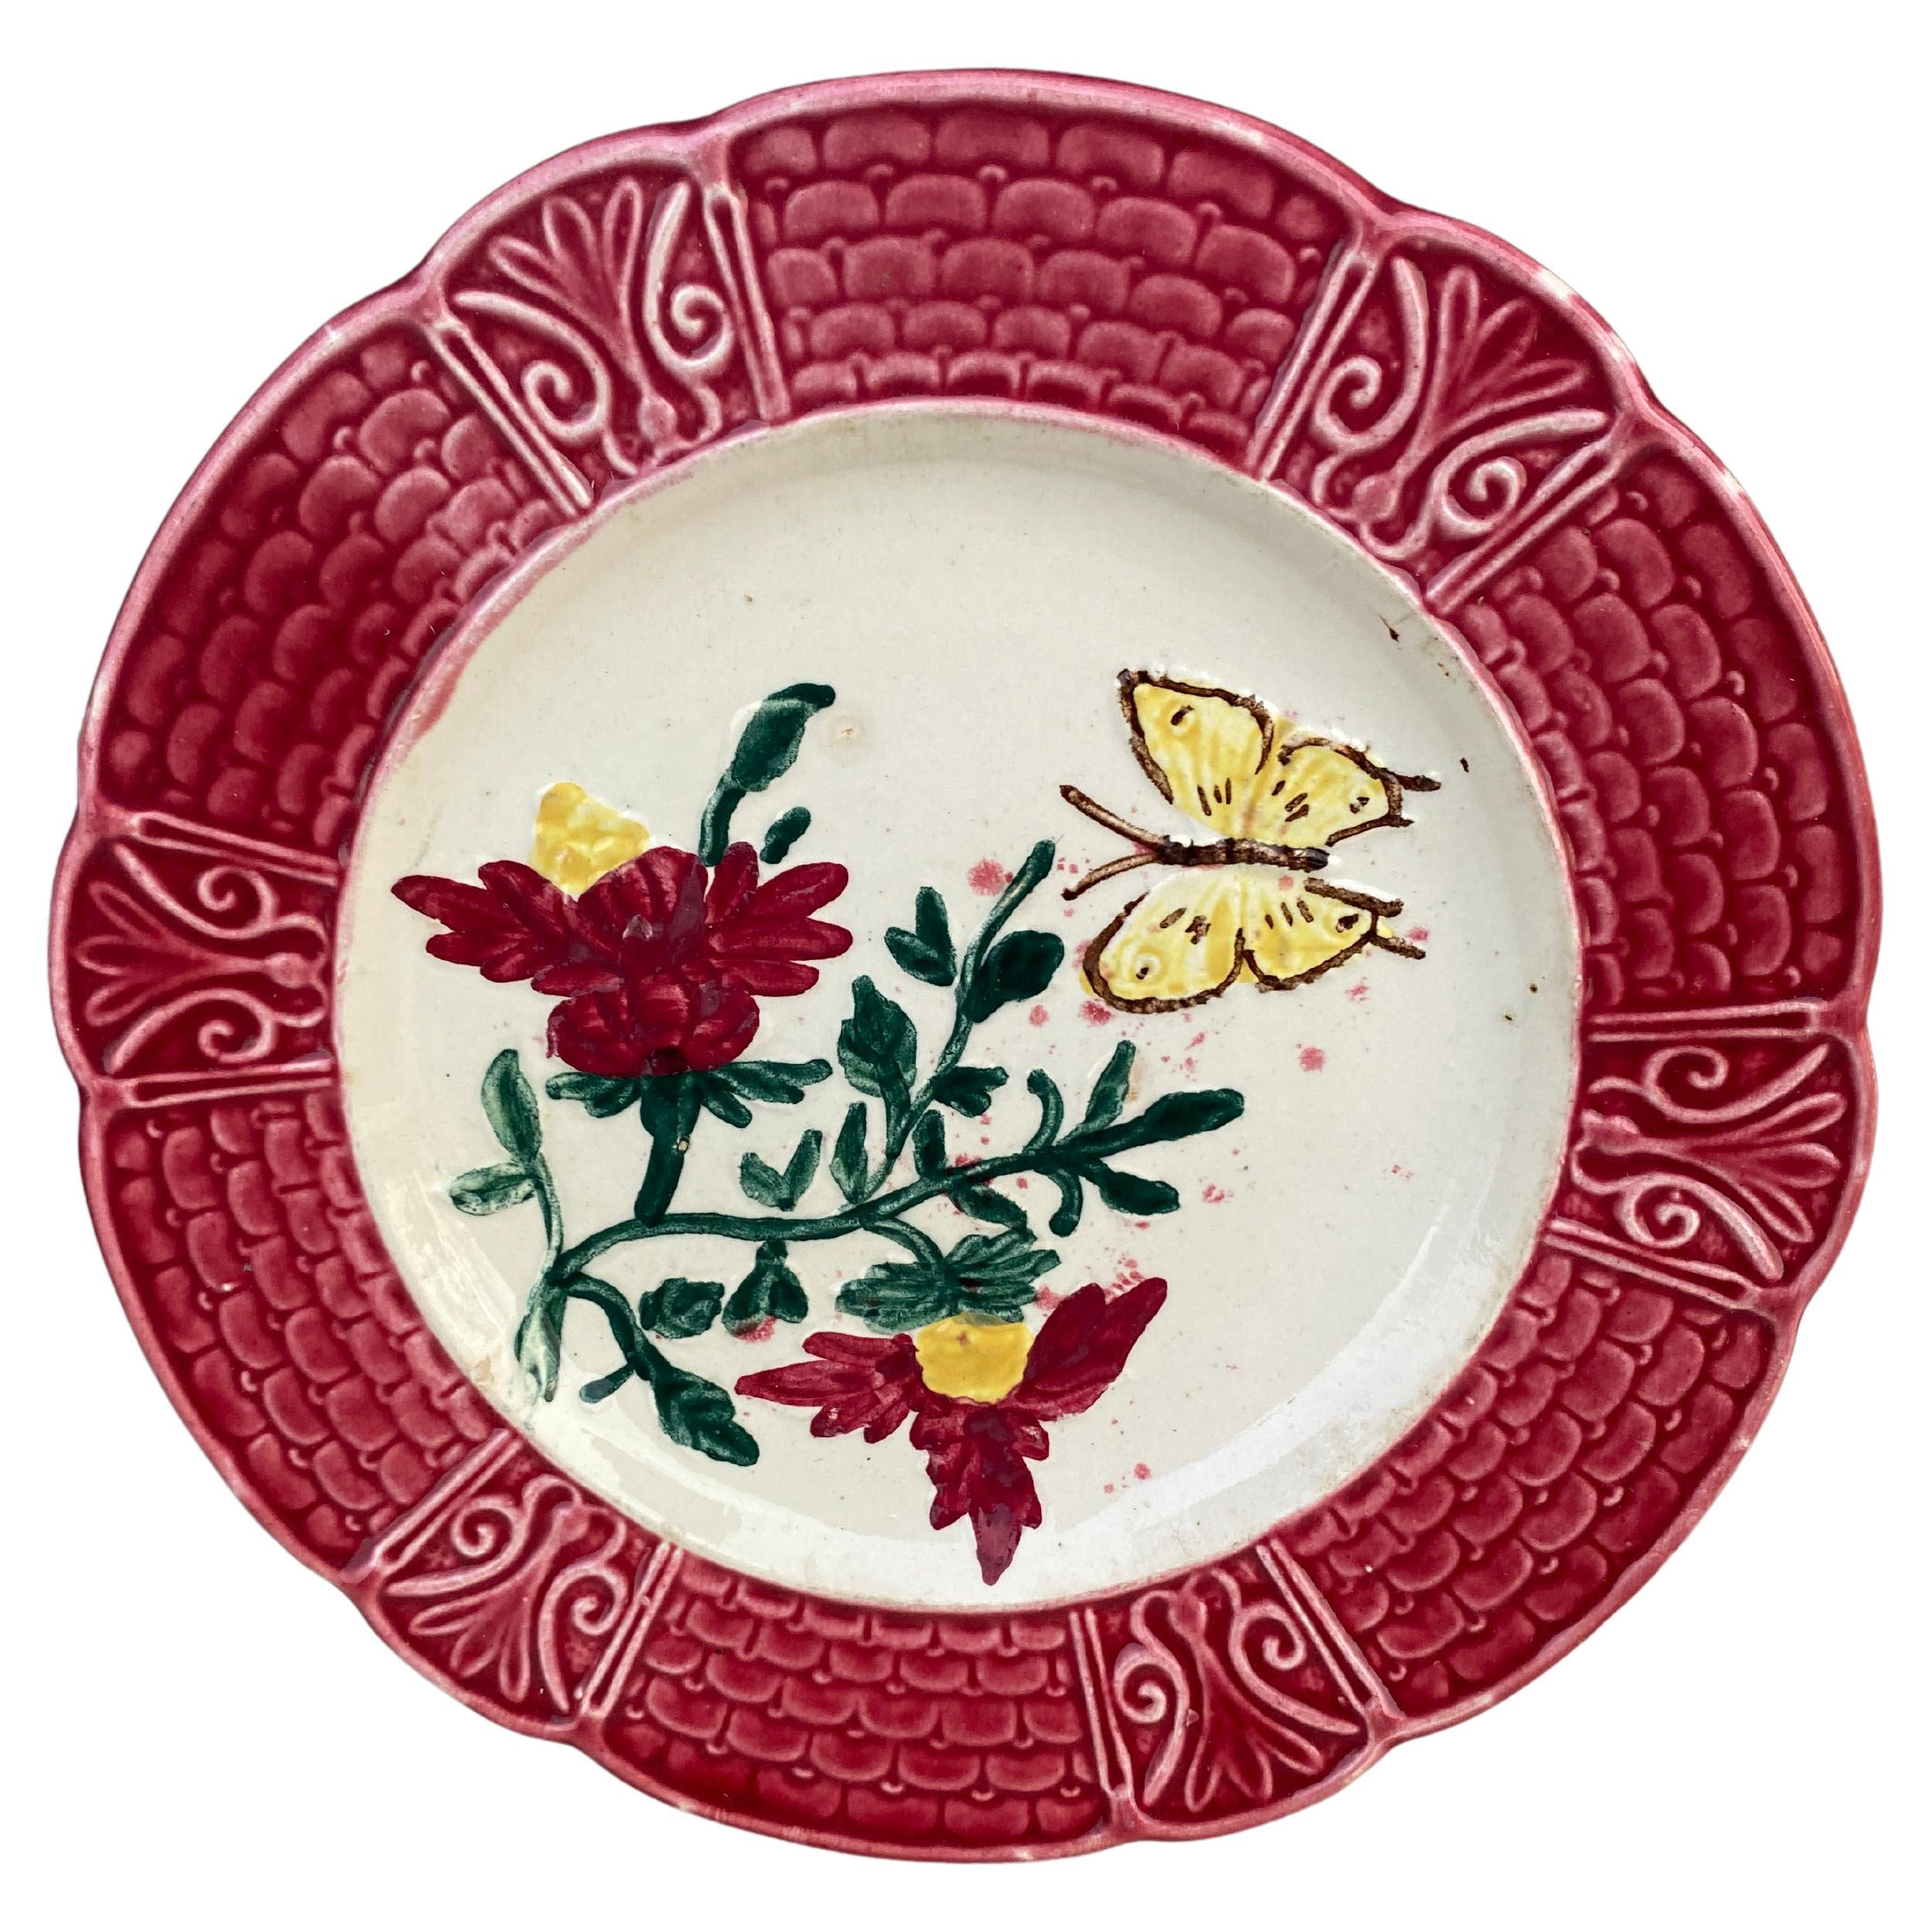 French Majolica Plate with Flowers & Butterfly, circa 1900